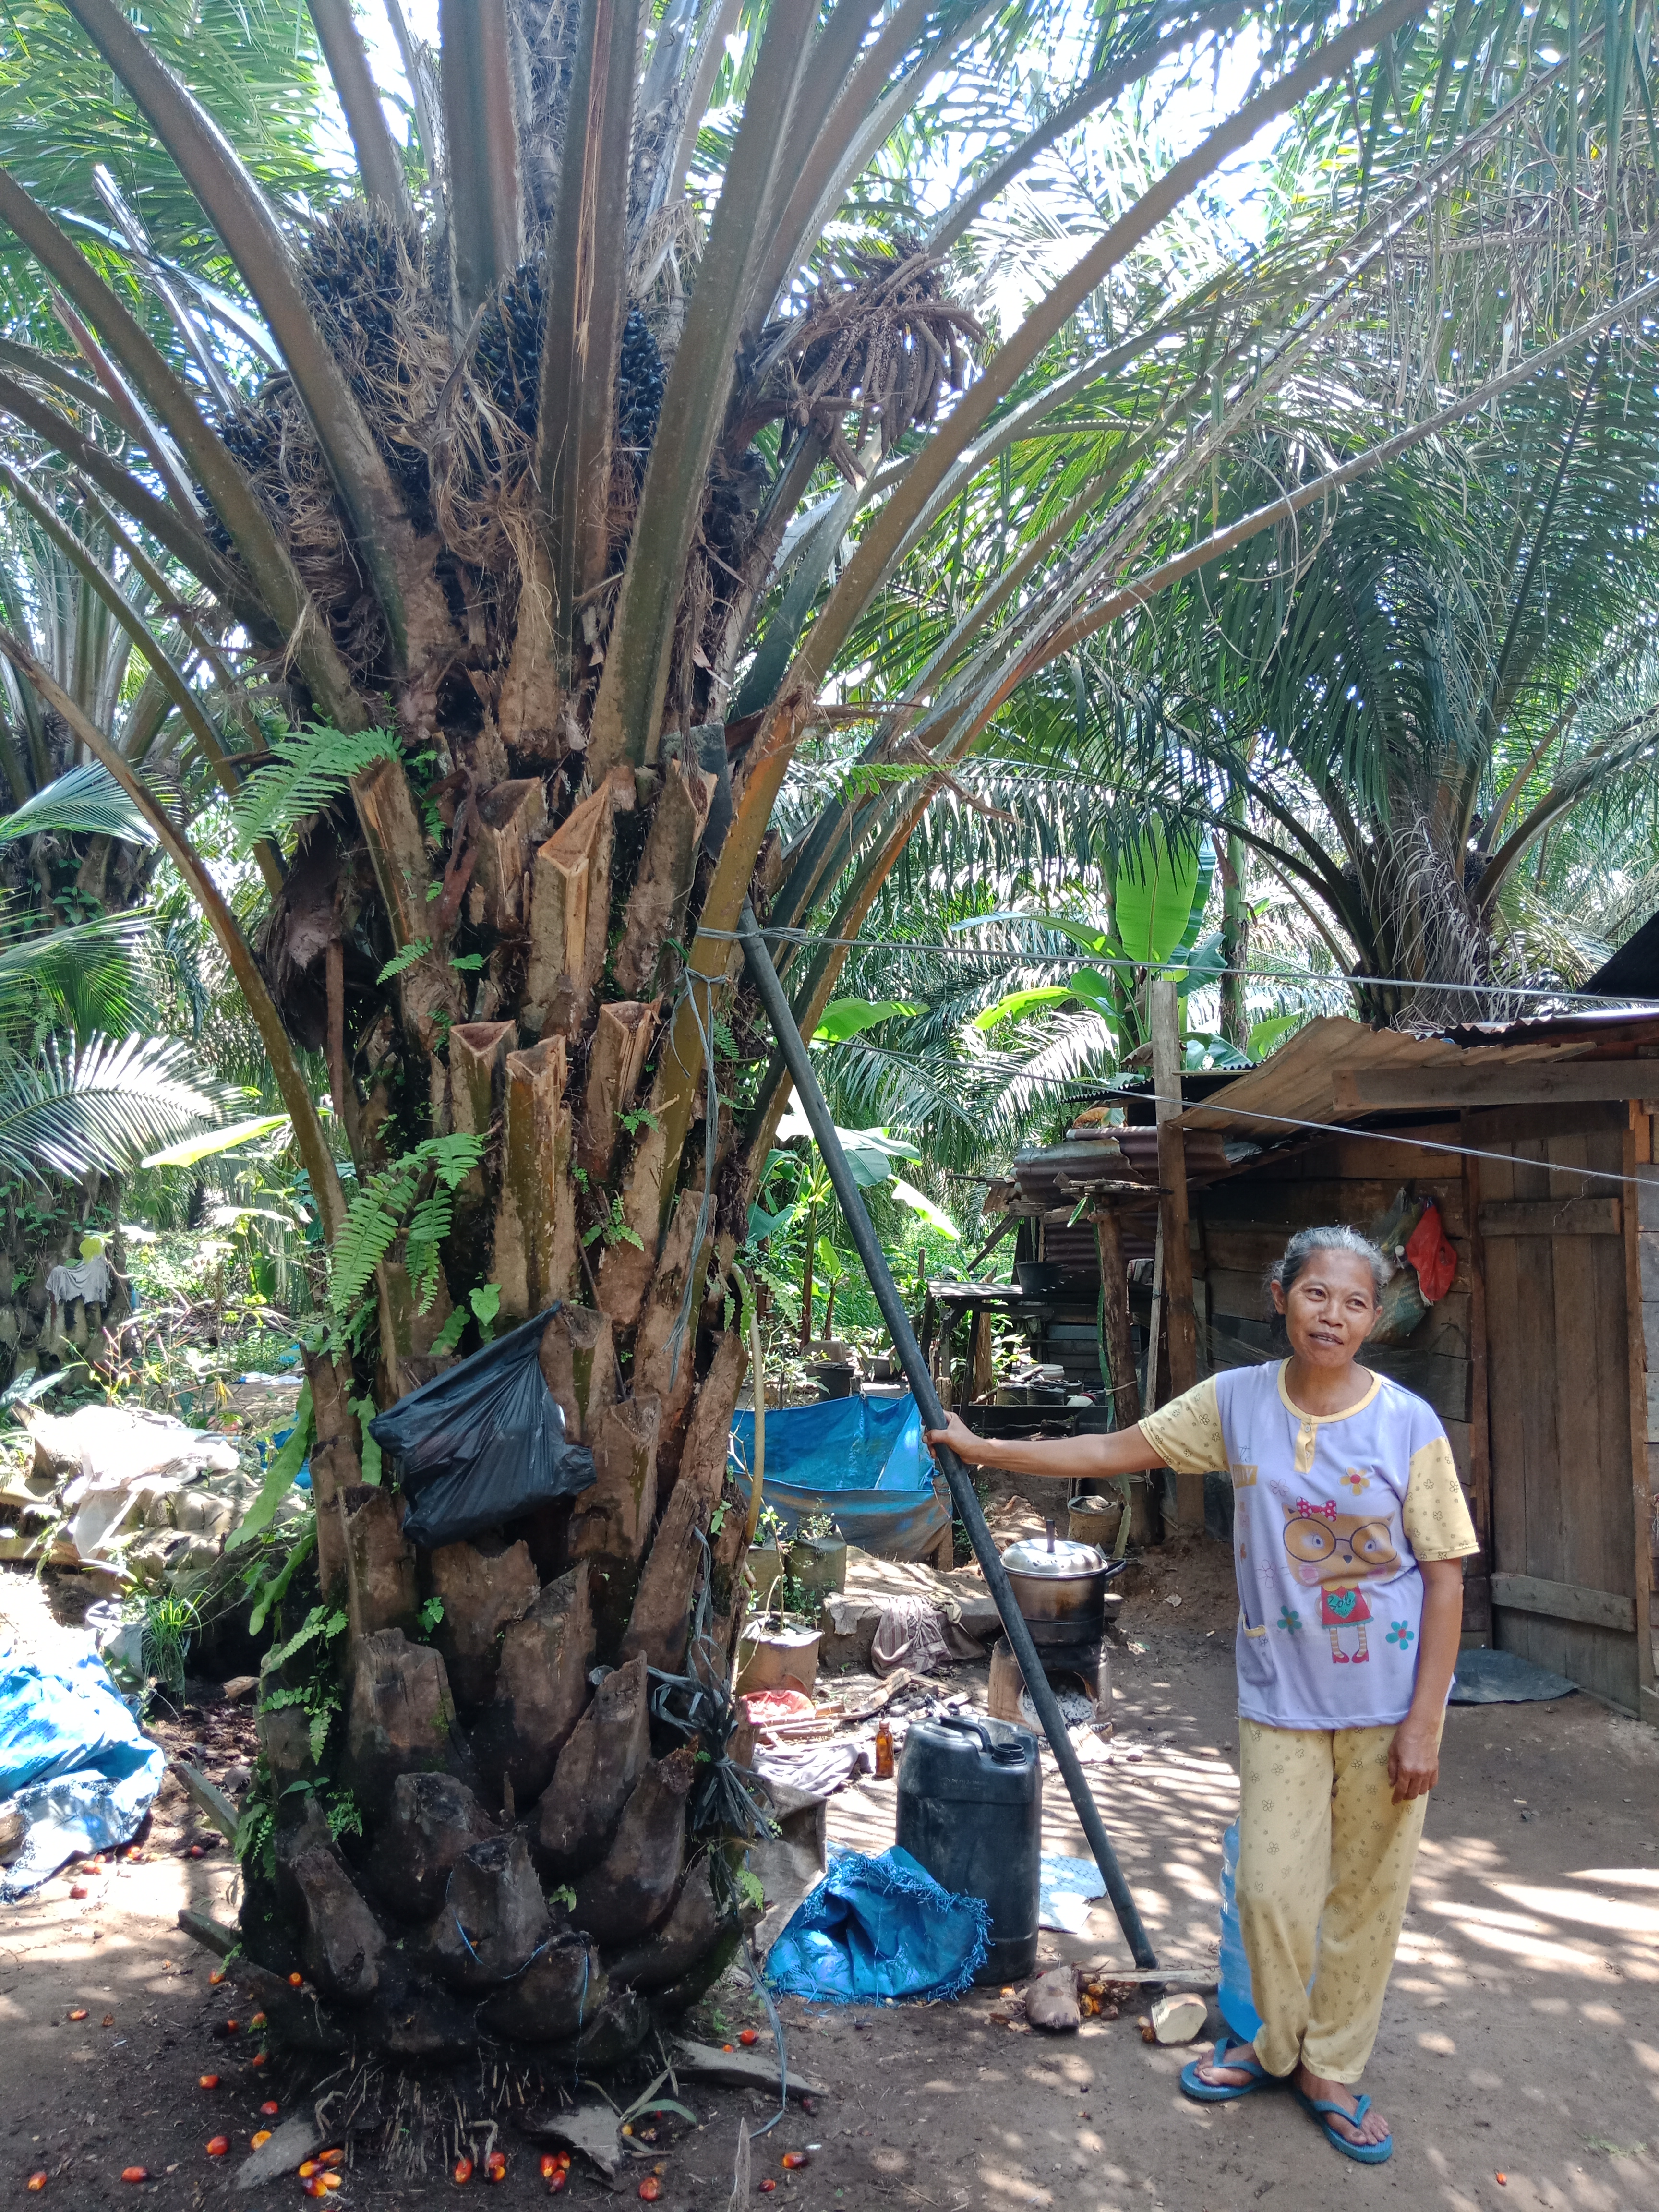 <p>Mrs. A is holding a *dodos* tool or harvesting tool made of fiber with a length of approximately 2 meters. Credit: Hendrika Tiarma</p>
